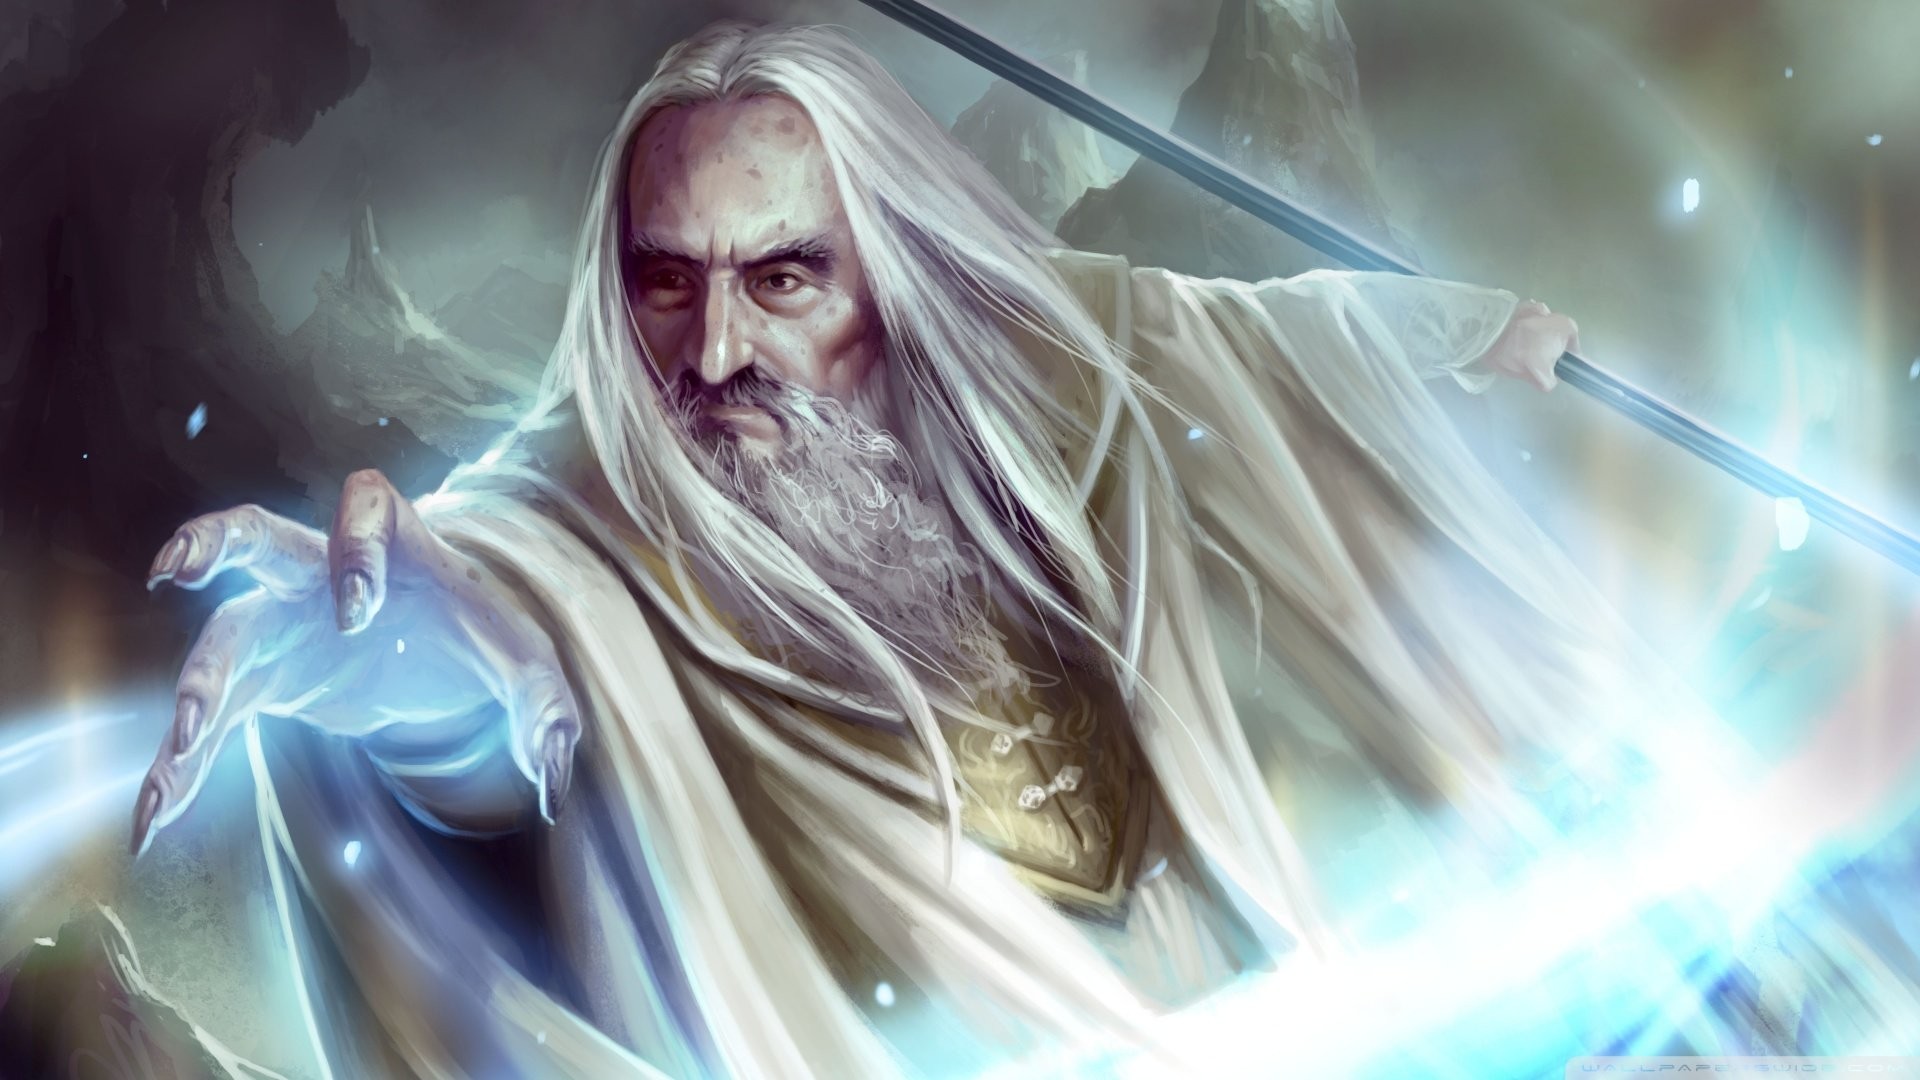 General 1920x1080 movies Saruman wizard The Lord of the Rings Guardians of Middle-earth villains fantasy men fantasy art artwork digital art watermarked